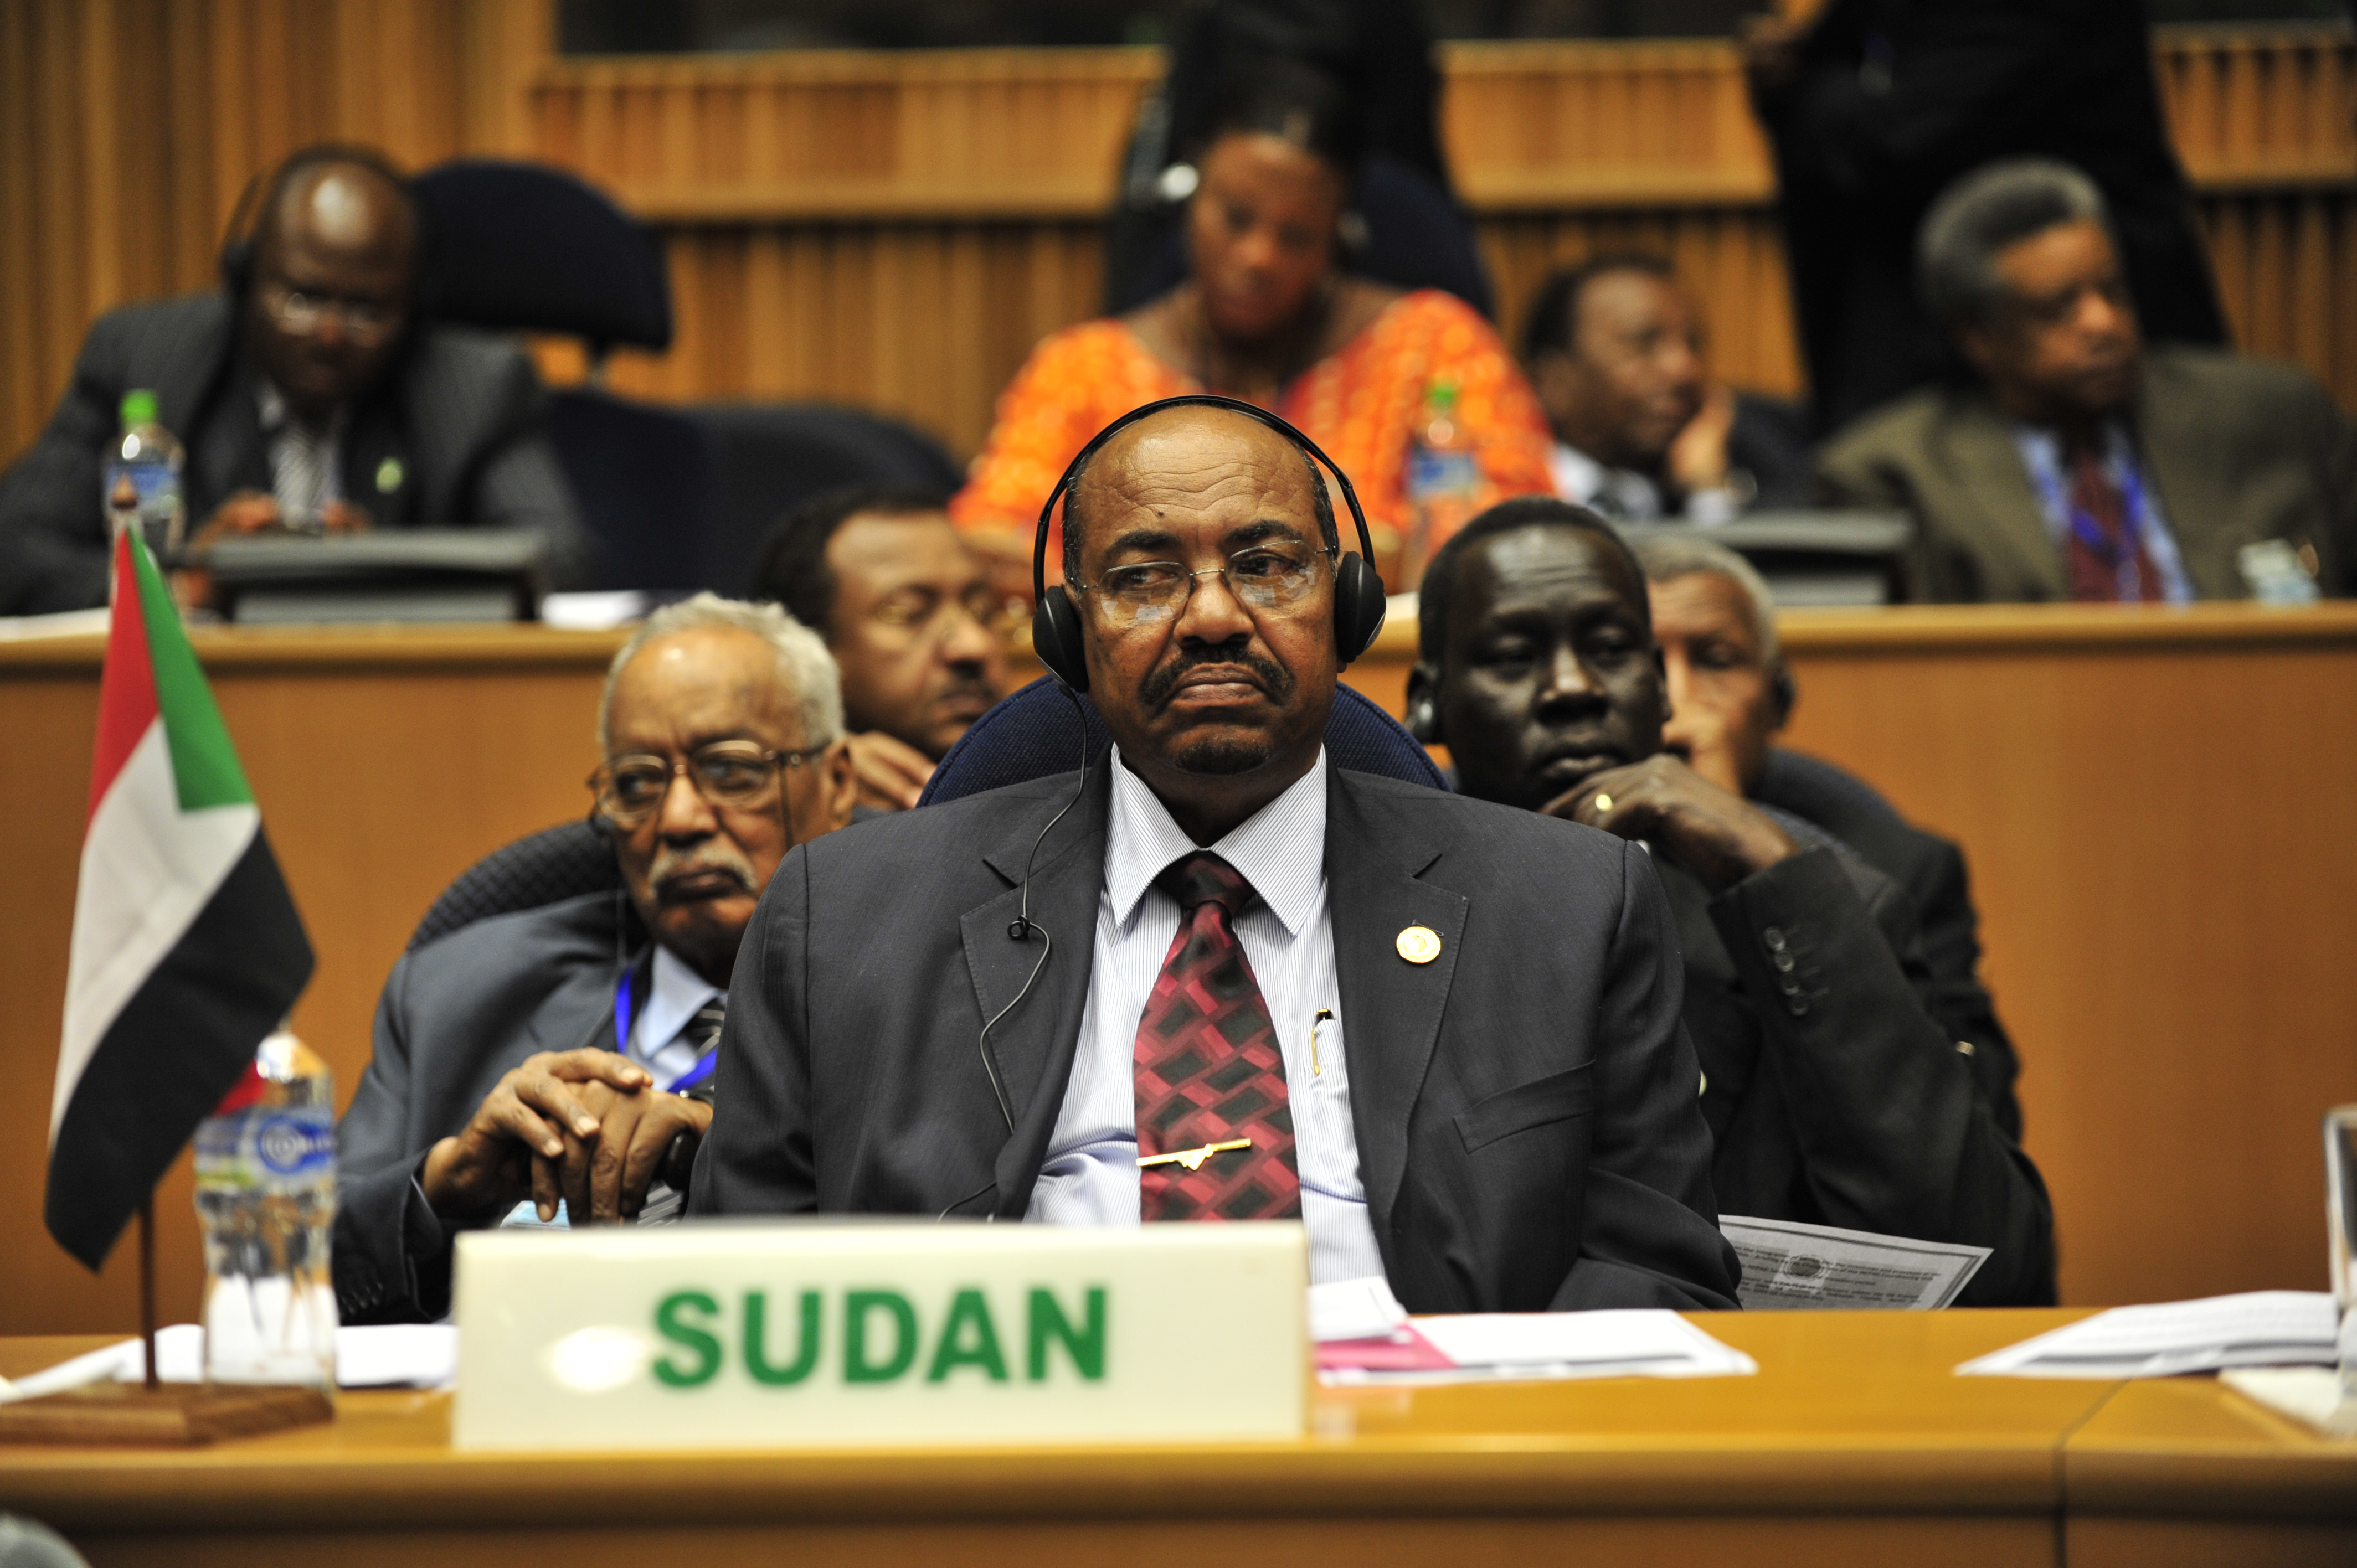 Sudan to turn ex-president over to ICC to stand trial for genocide